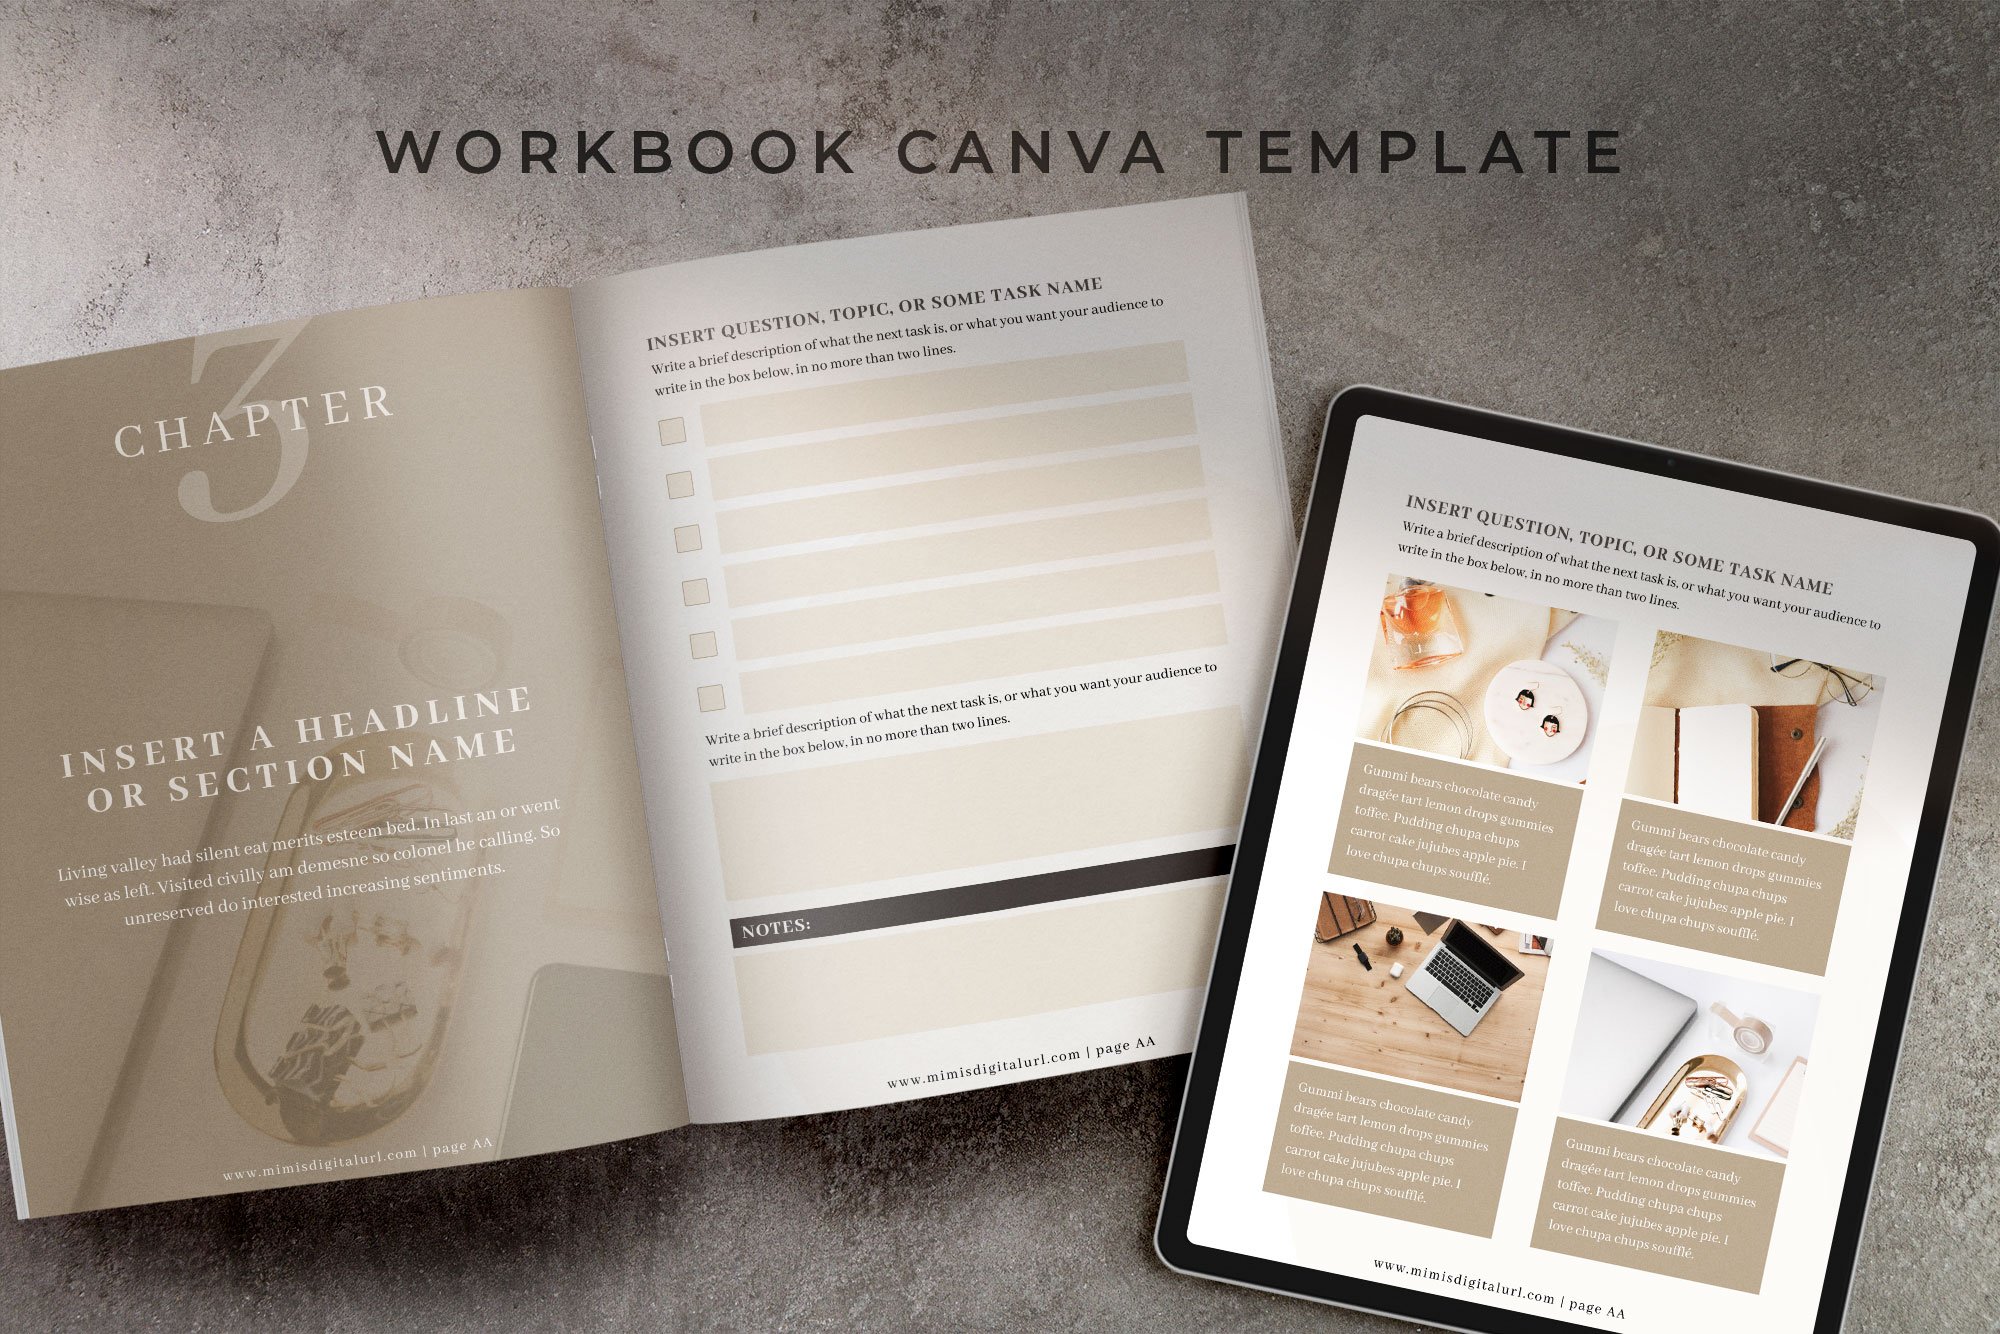 Workbook Canva Template | Mink cover image.